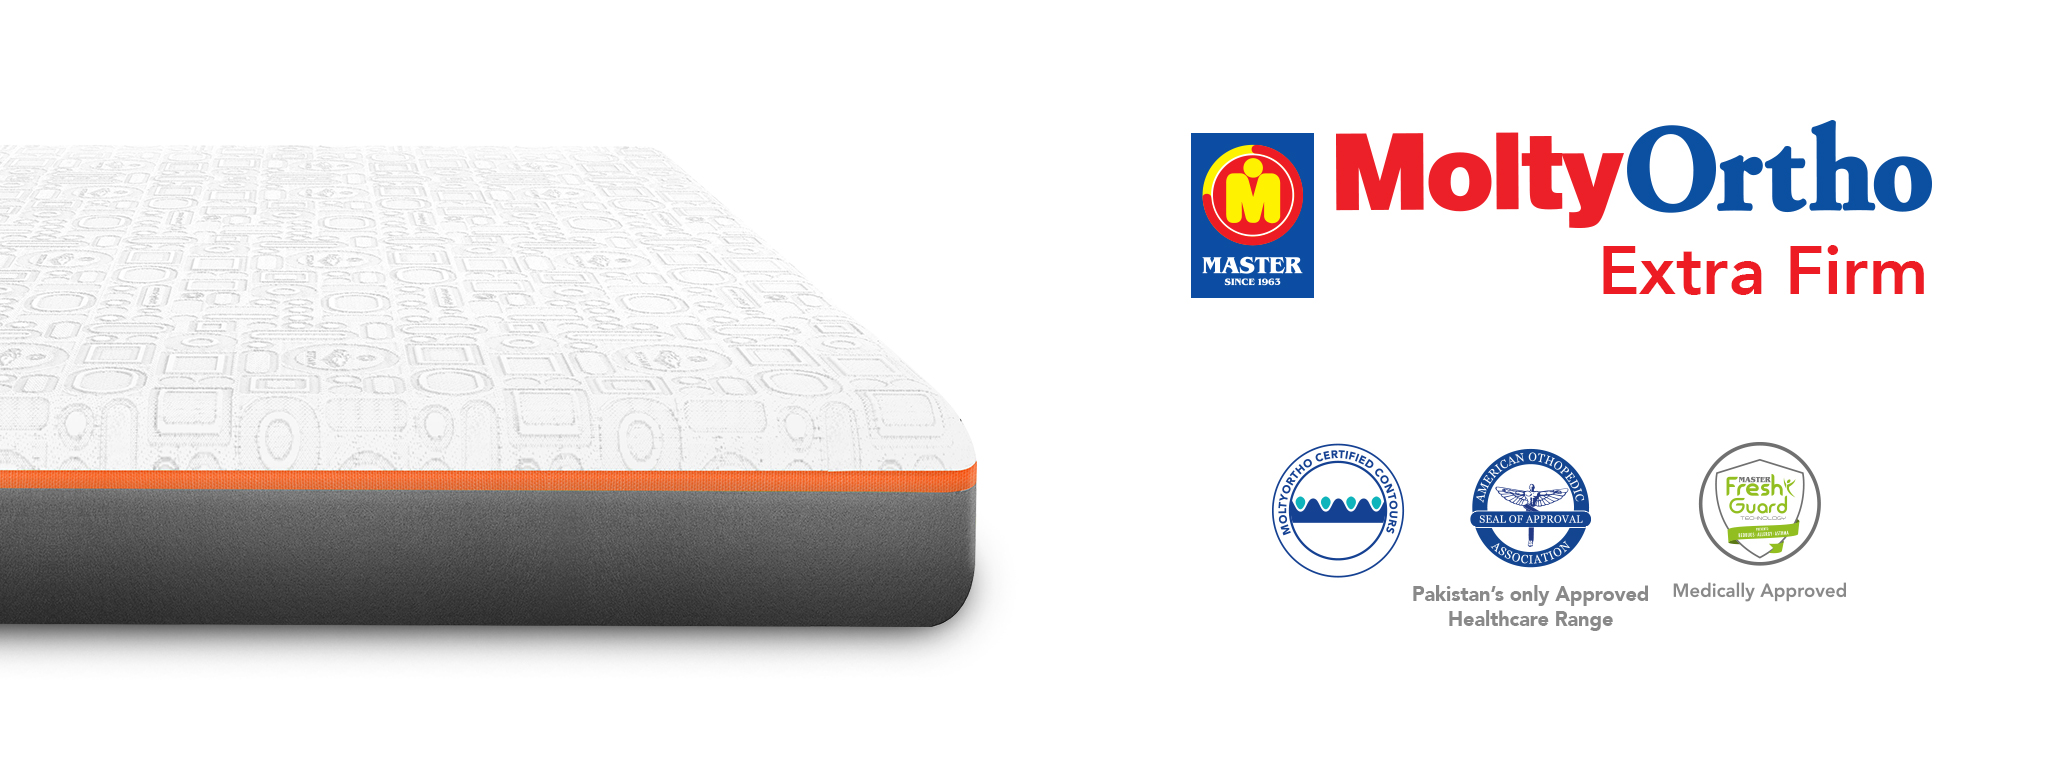 molty ortho mattress price in pakistan